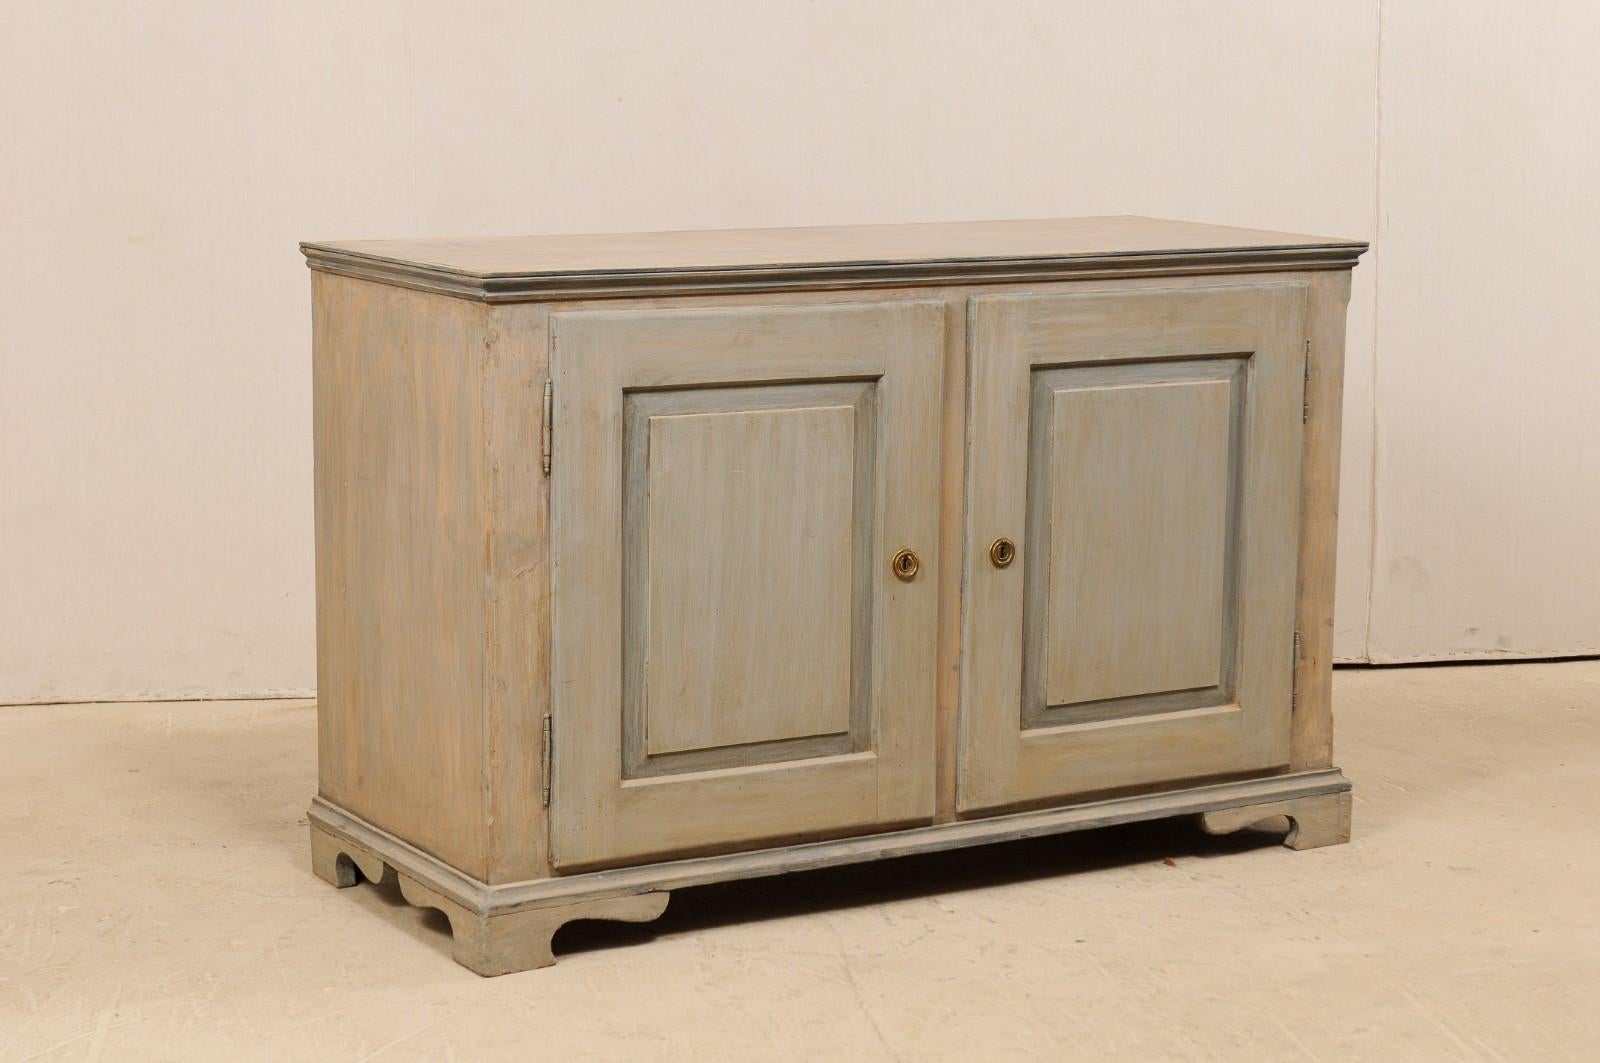 An Italian painted wood two-door cabinet from the 19th century. This antique Italian cabinet features two raised panel doors housed within a plainly decorated case, flanked by straight line molding beneath top edge and skirt. The buffet is raised on